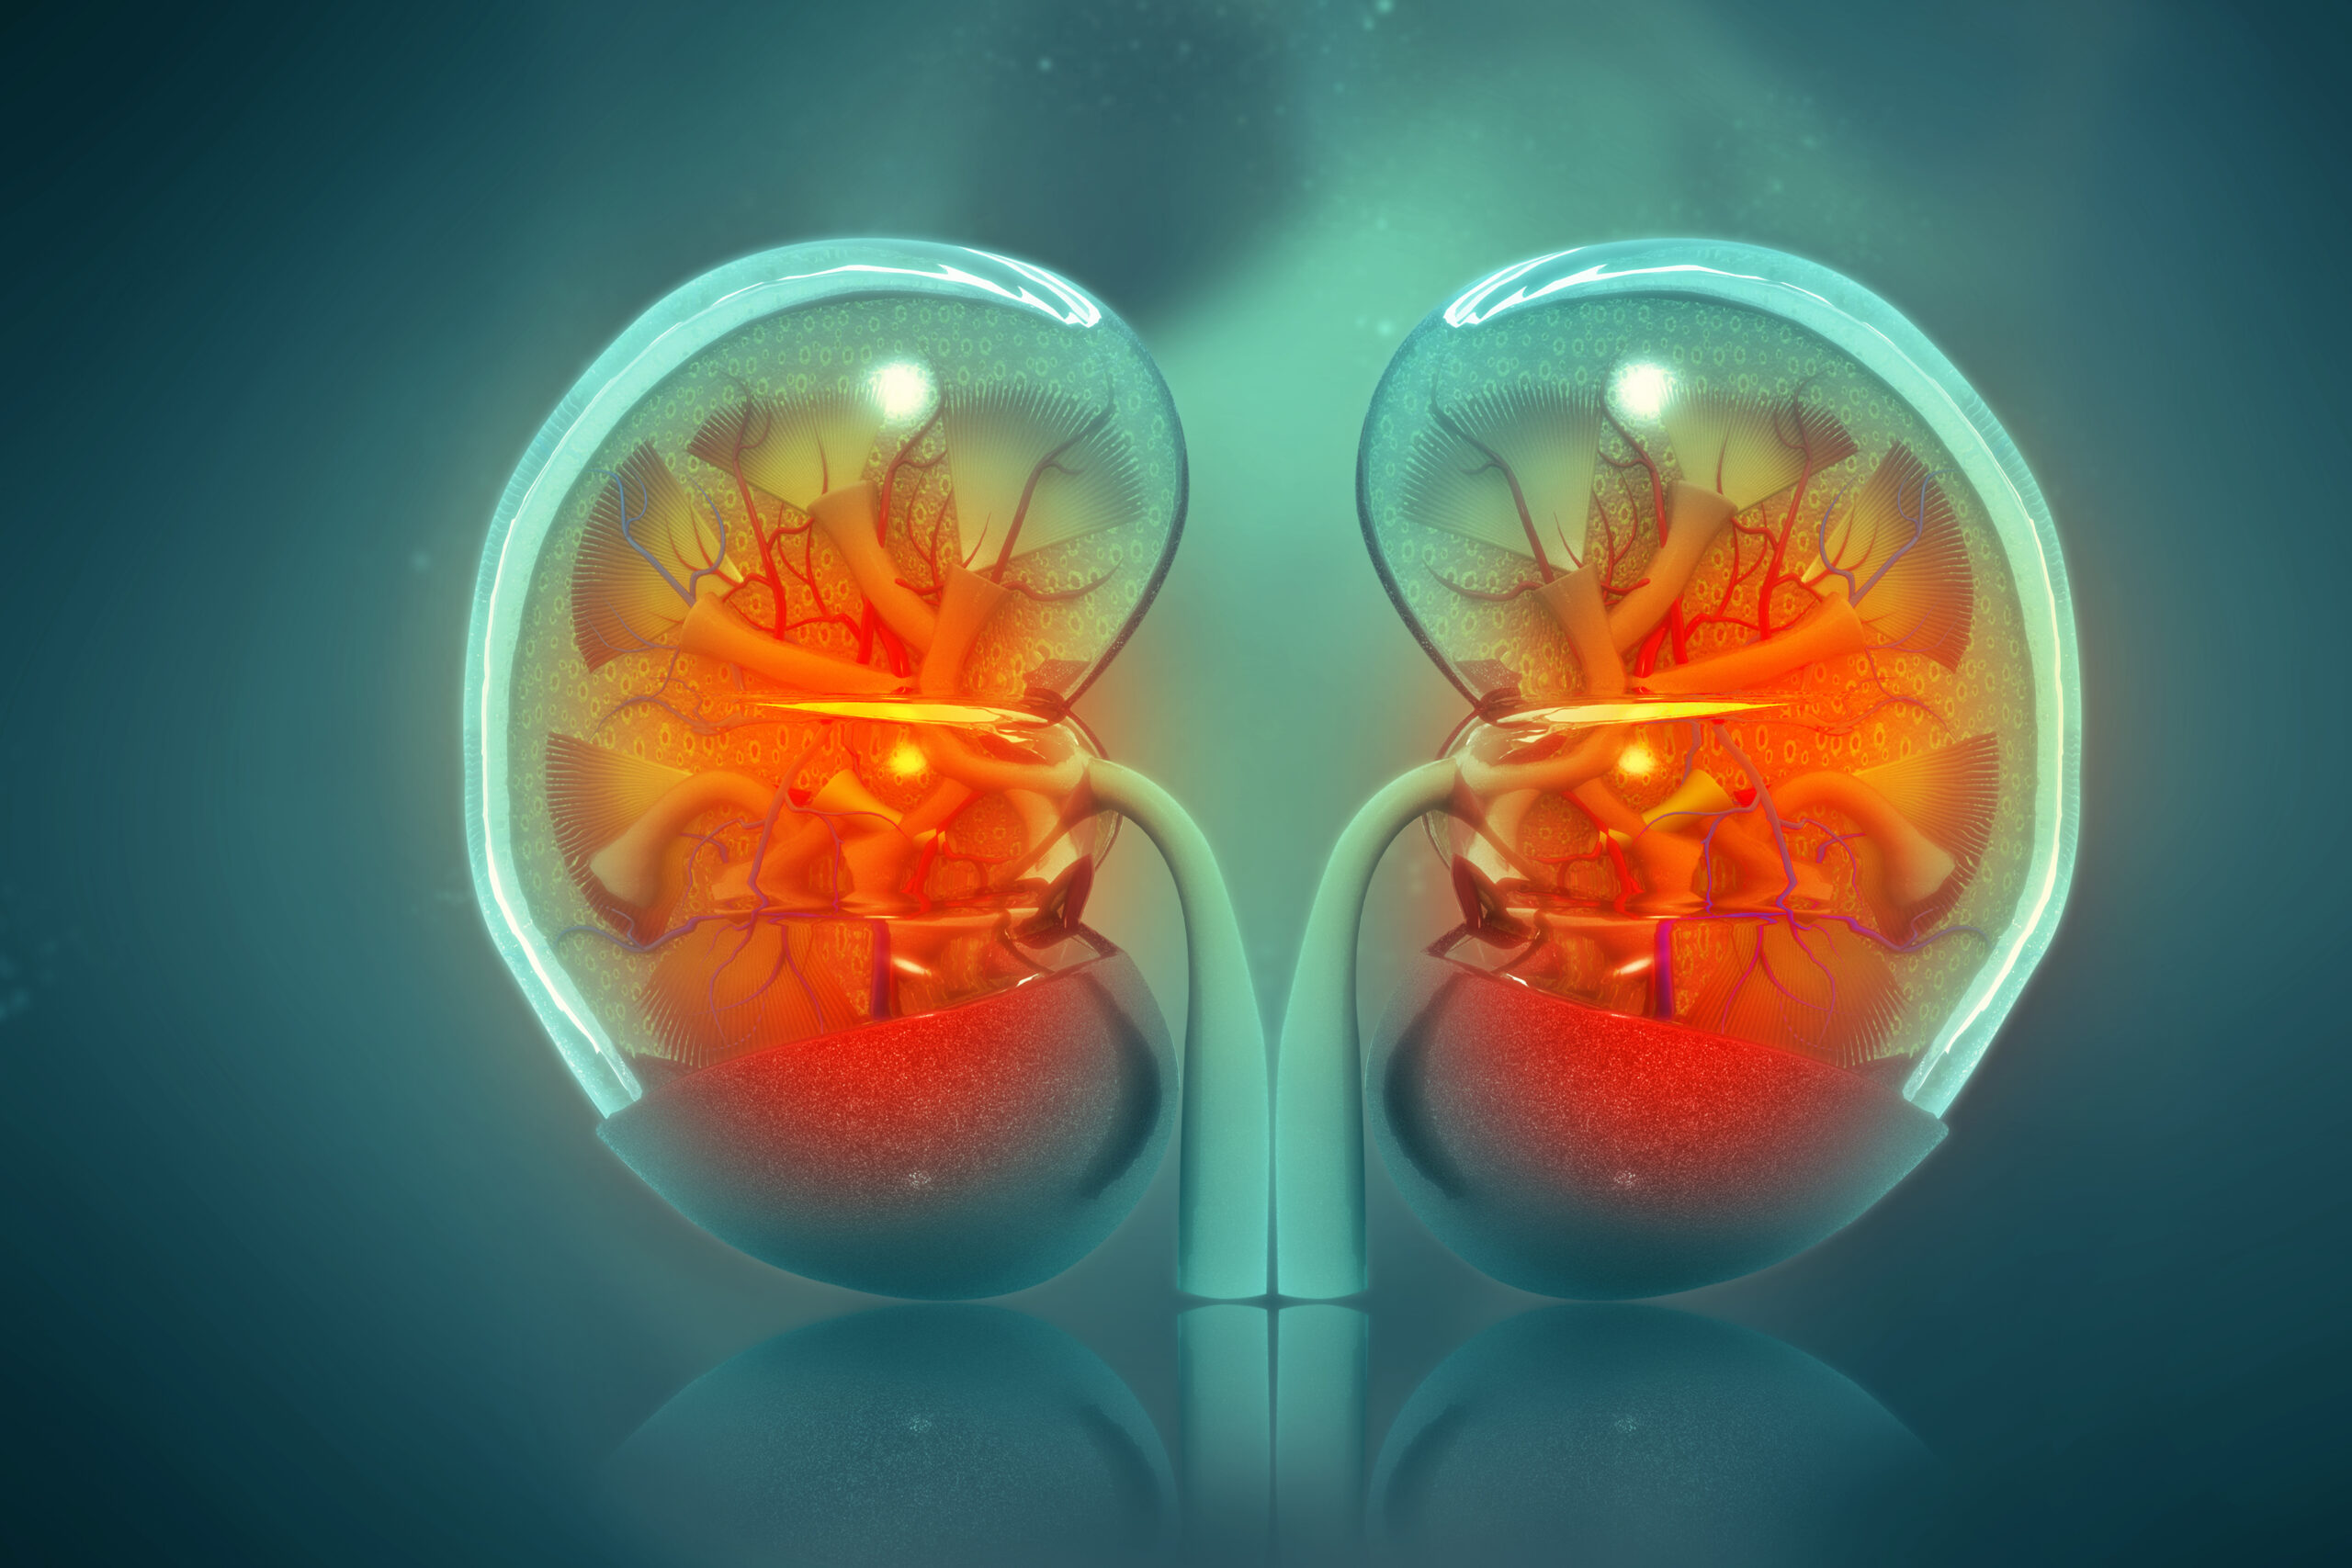 healthy kidneys for the future